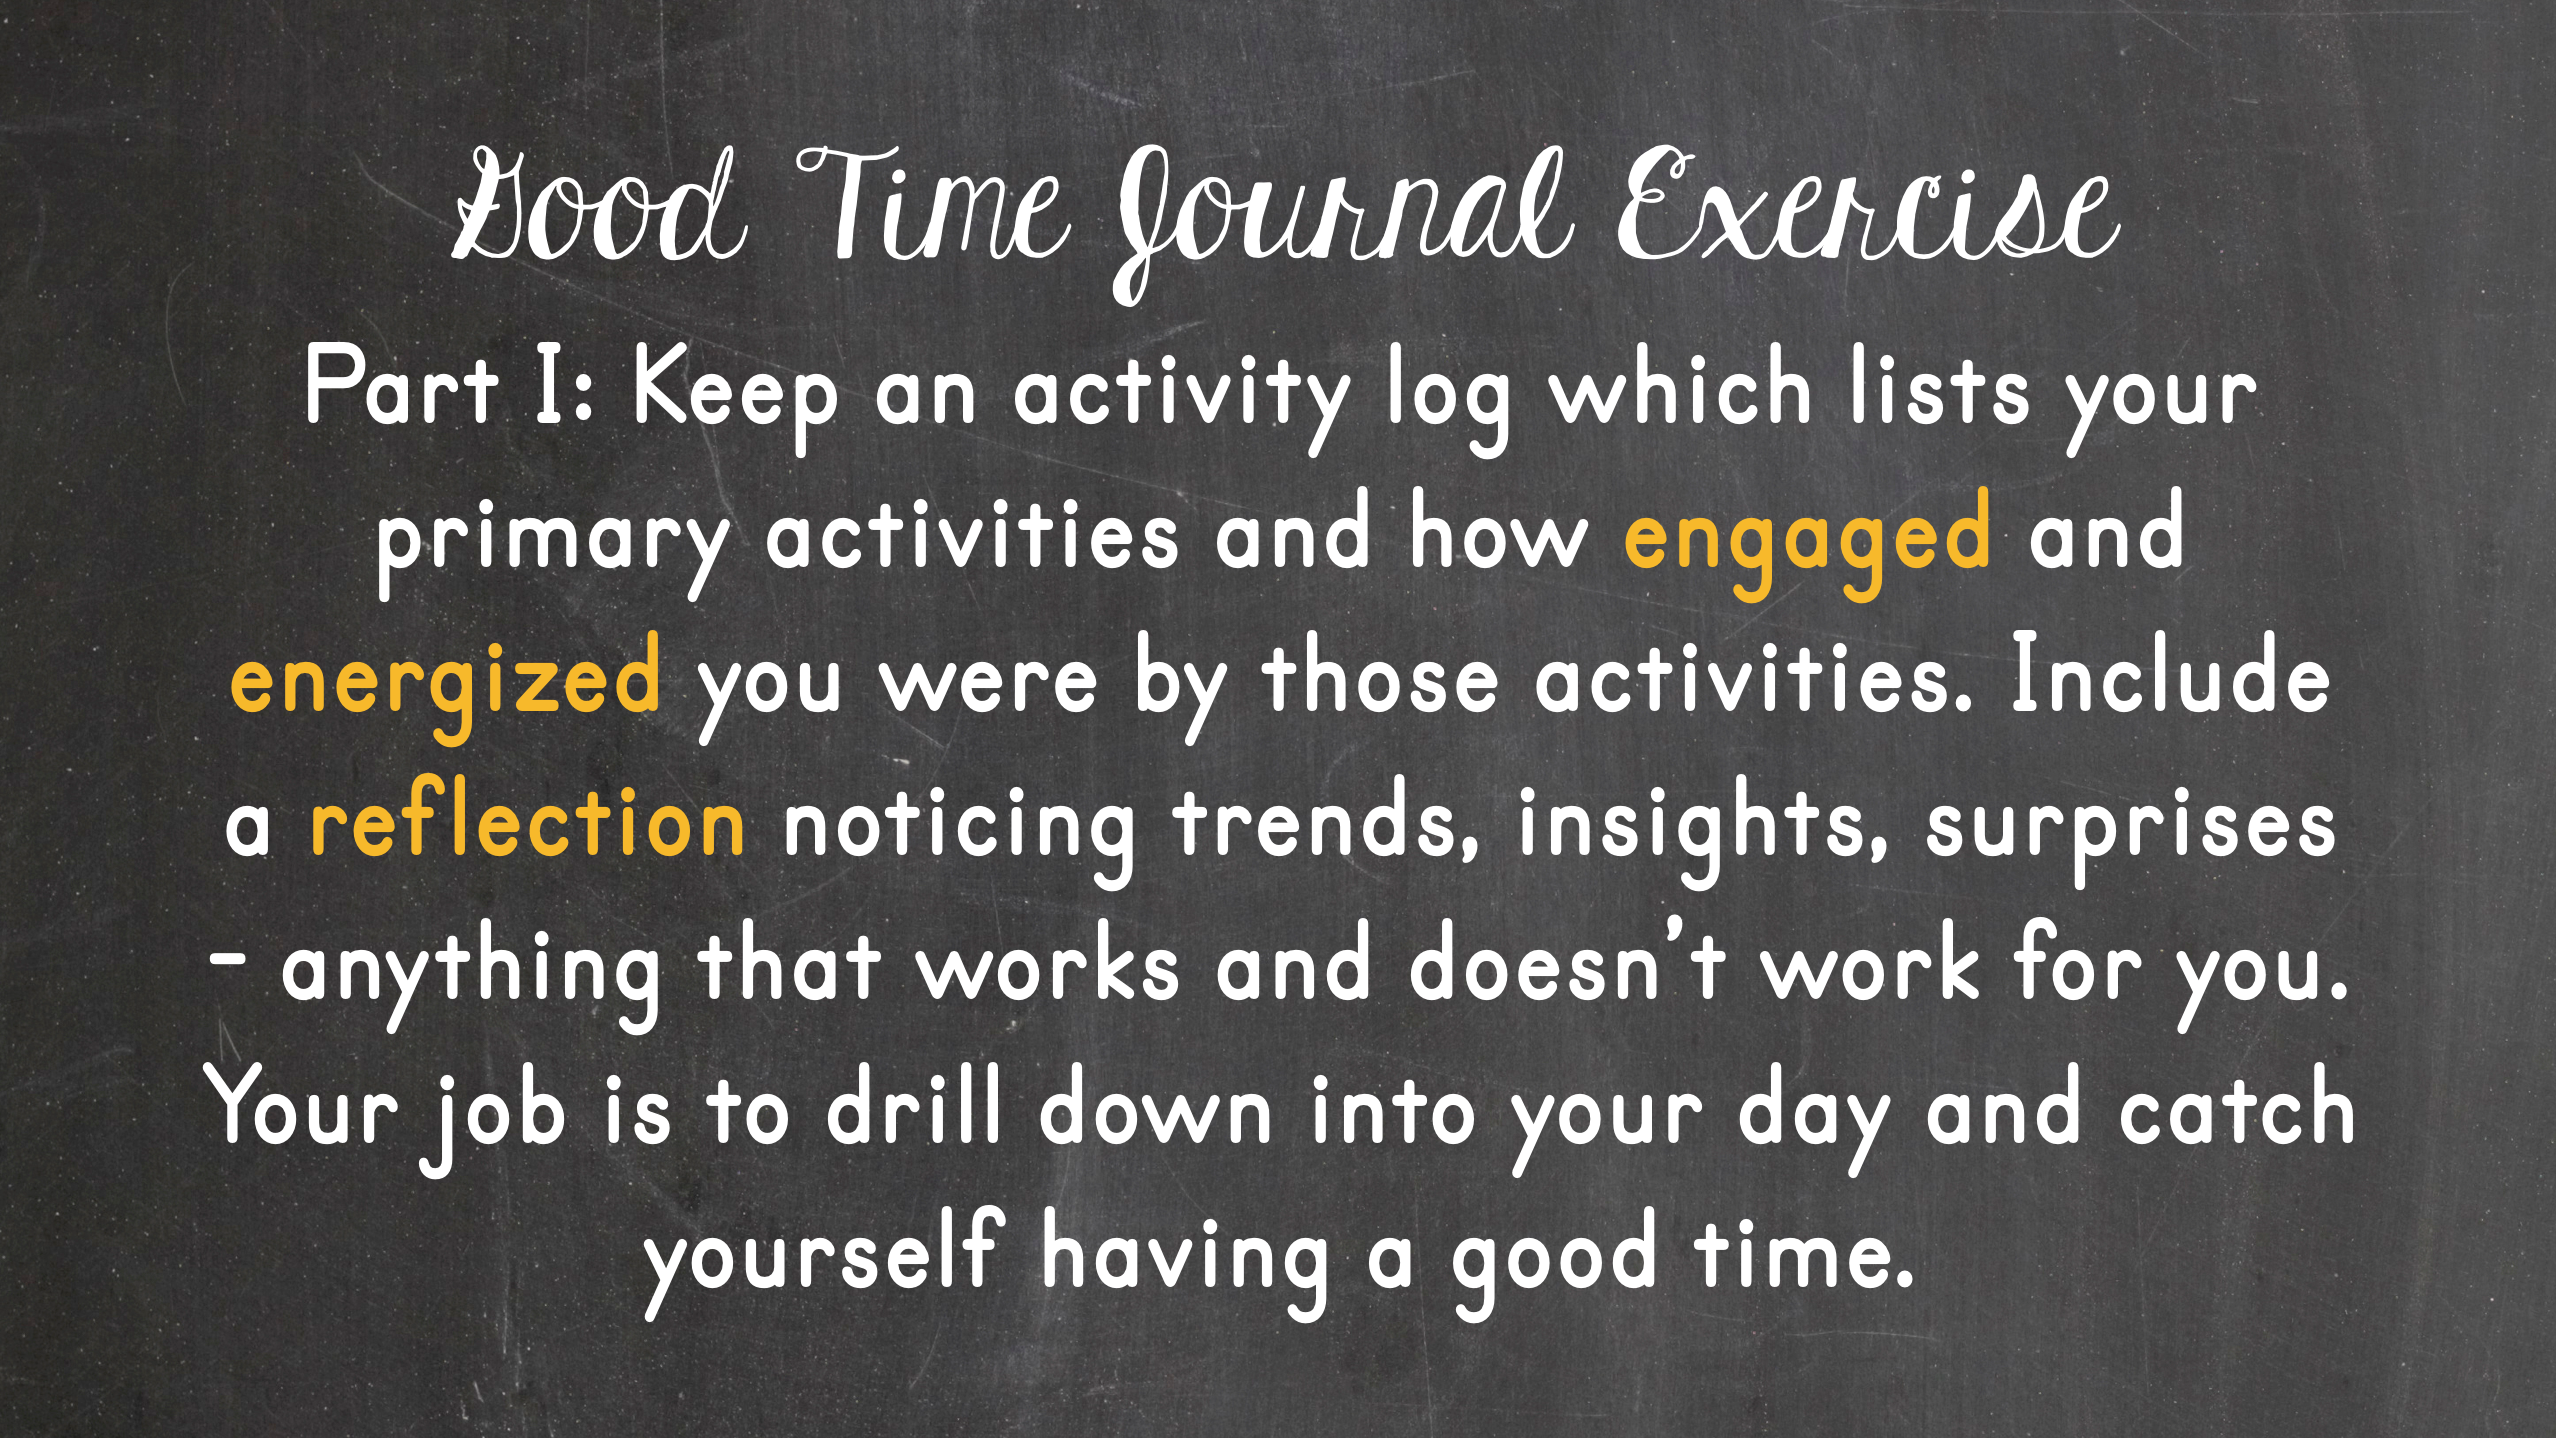 Good Time Journal Exercise Part I.png